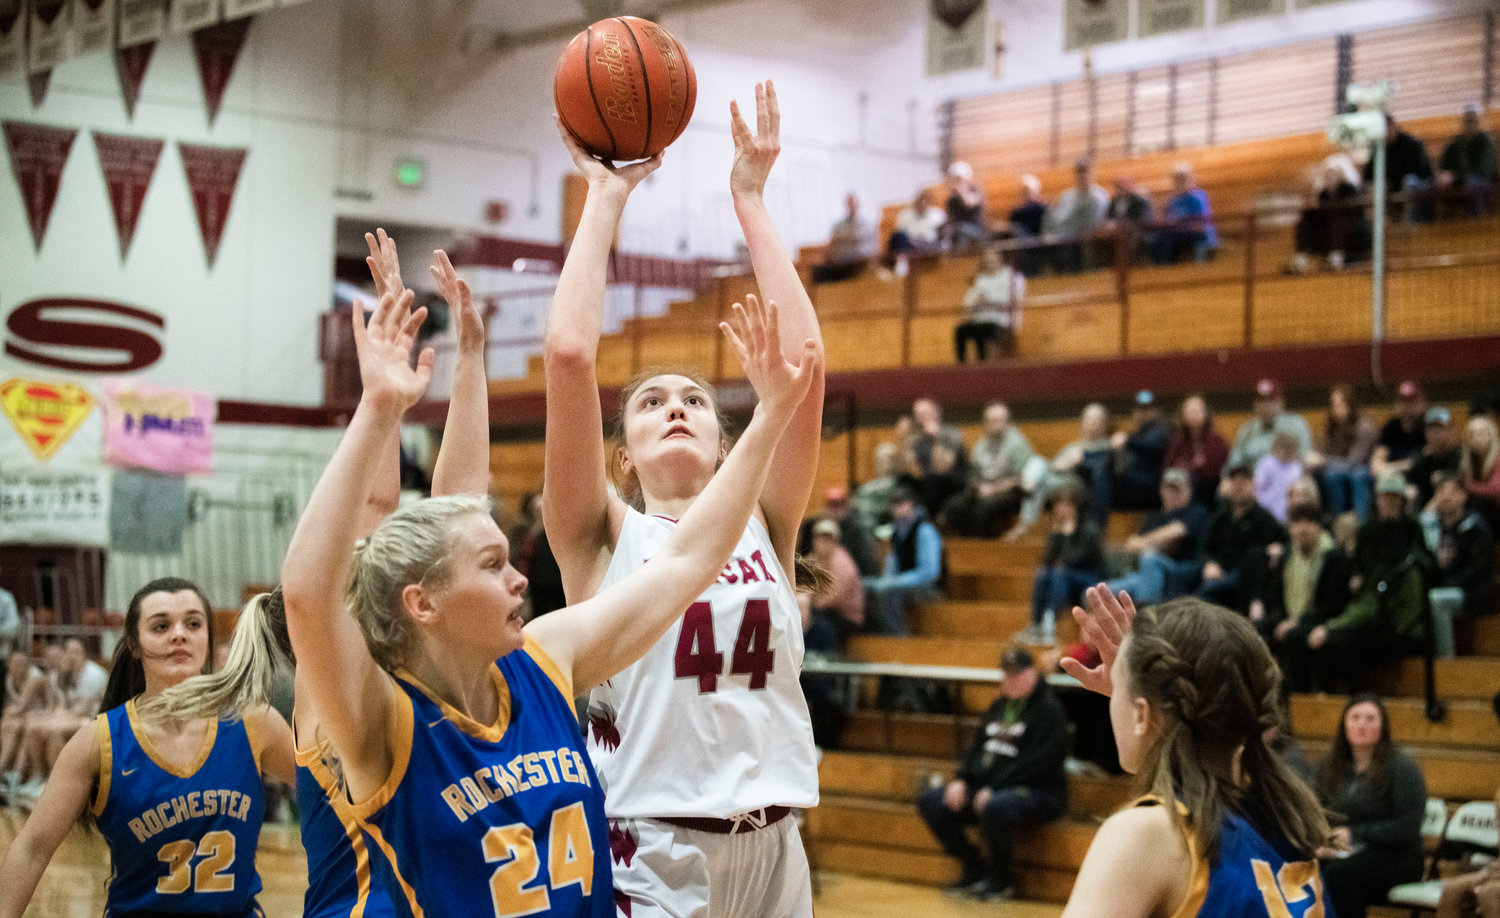 W.F. West’s Julia Dalan (44) looks to score during a game against Rochester in Chehalis Thursday night.